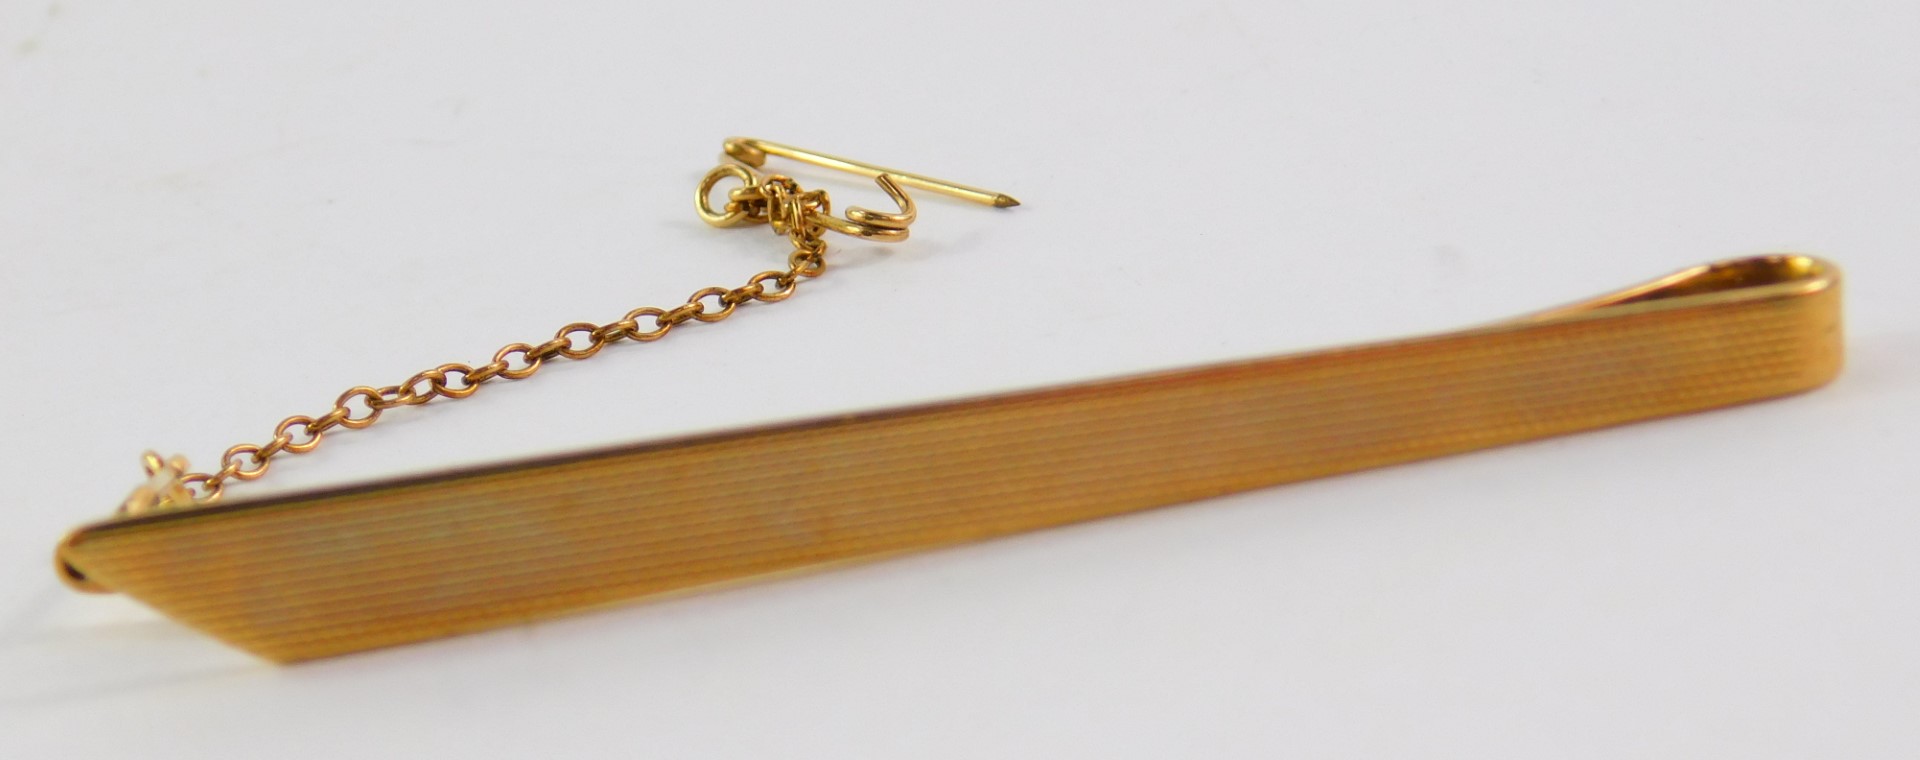 A 9ct gold tie slide, with engine turned decoration and safety pin as fitted, 6.2g.